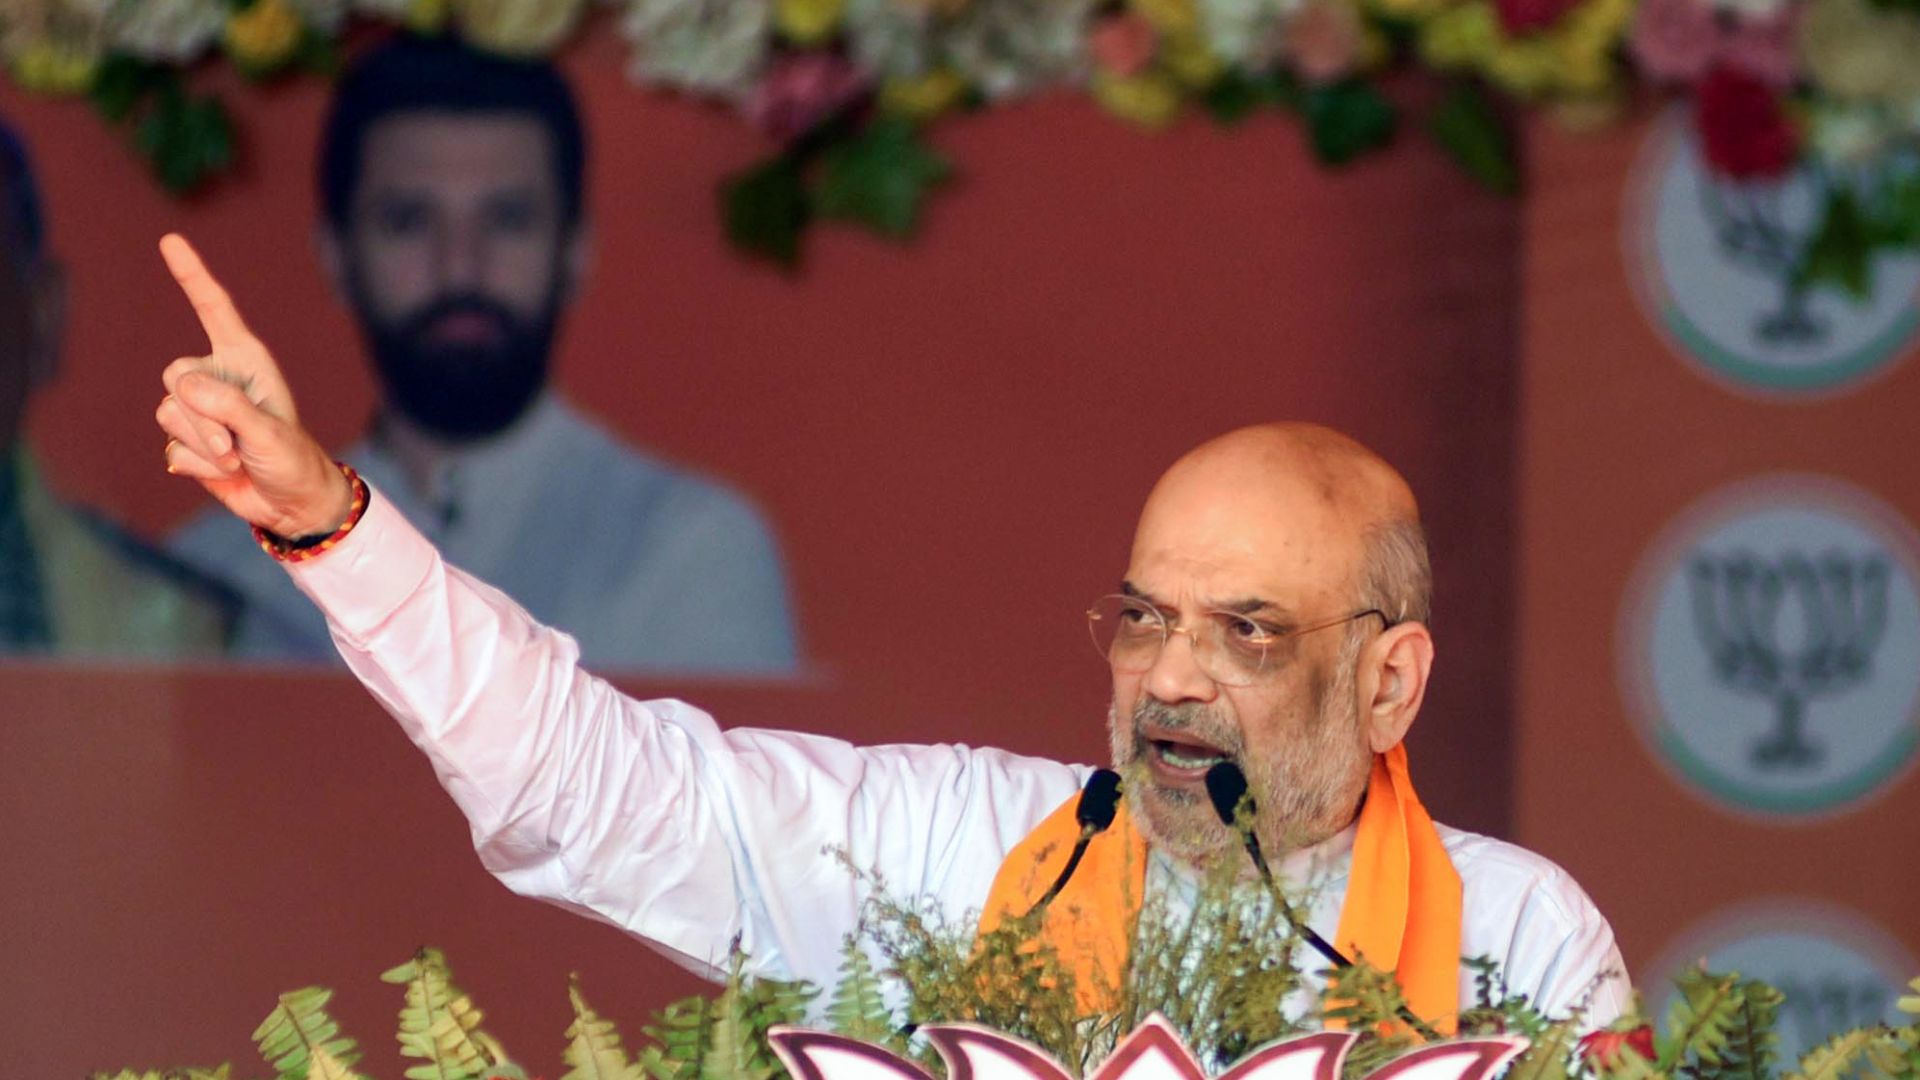 Amit Shah Labels Congress and Allies as “Deceivers” in Secunderabad Rally